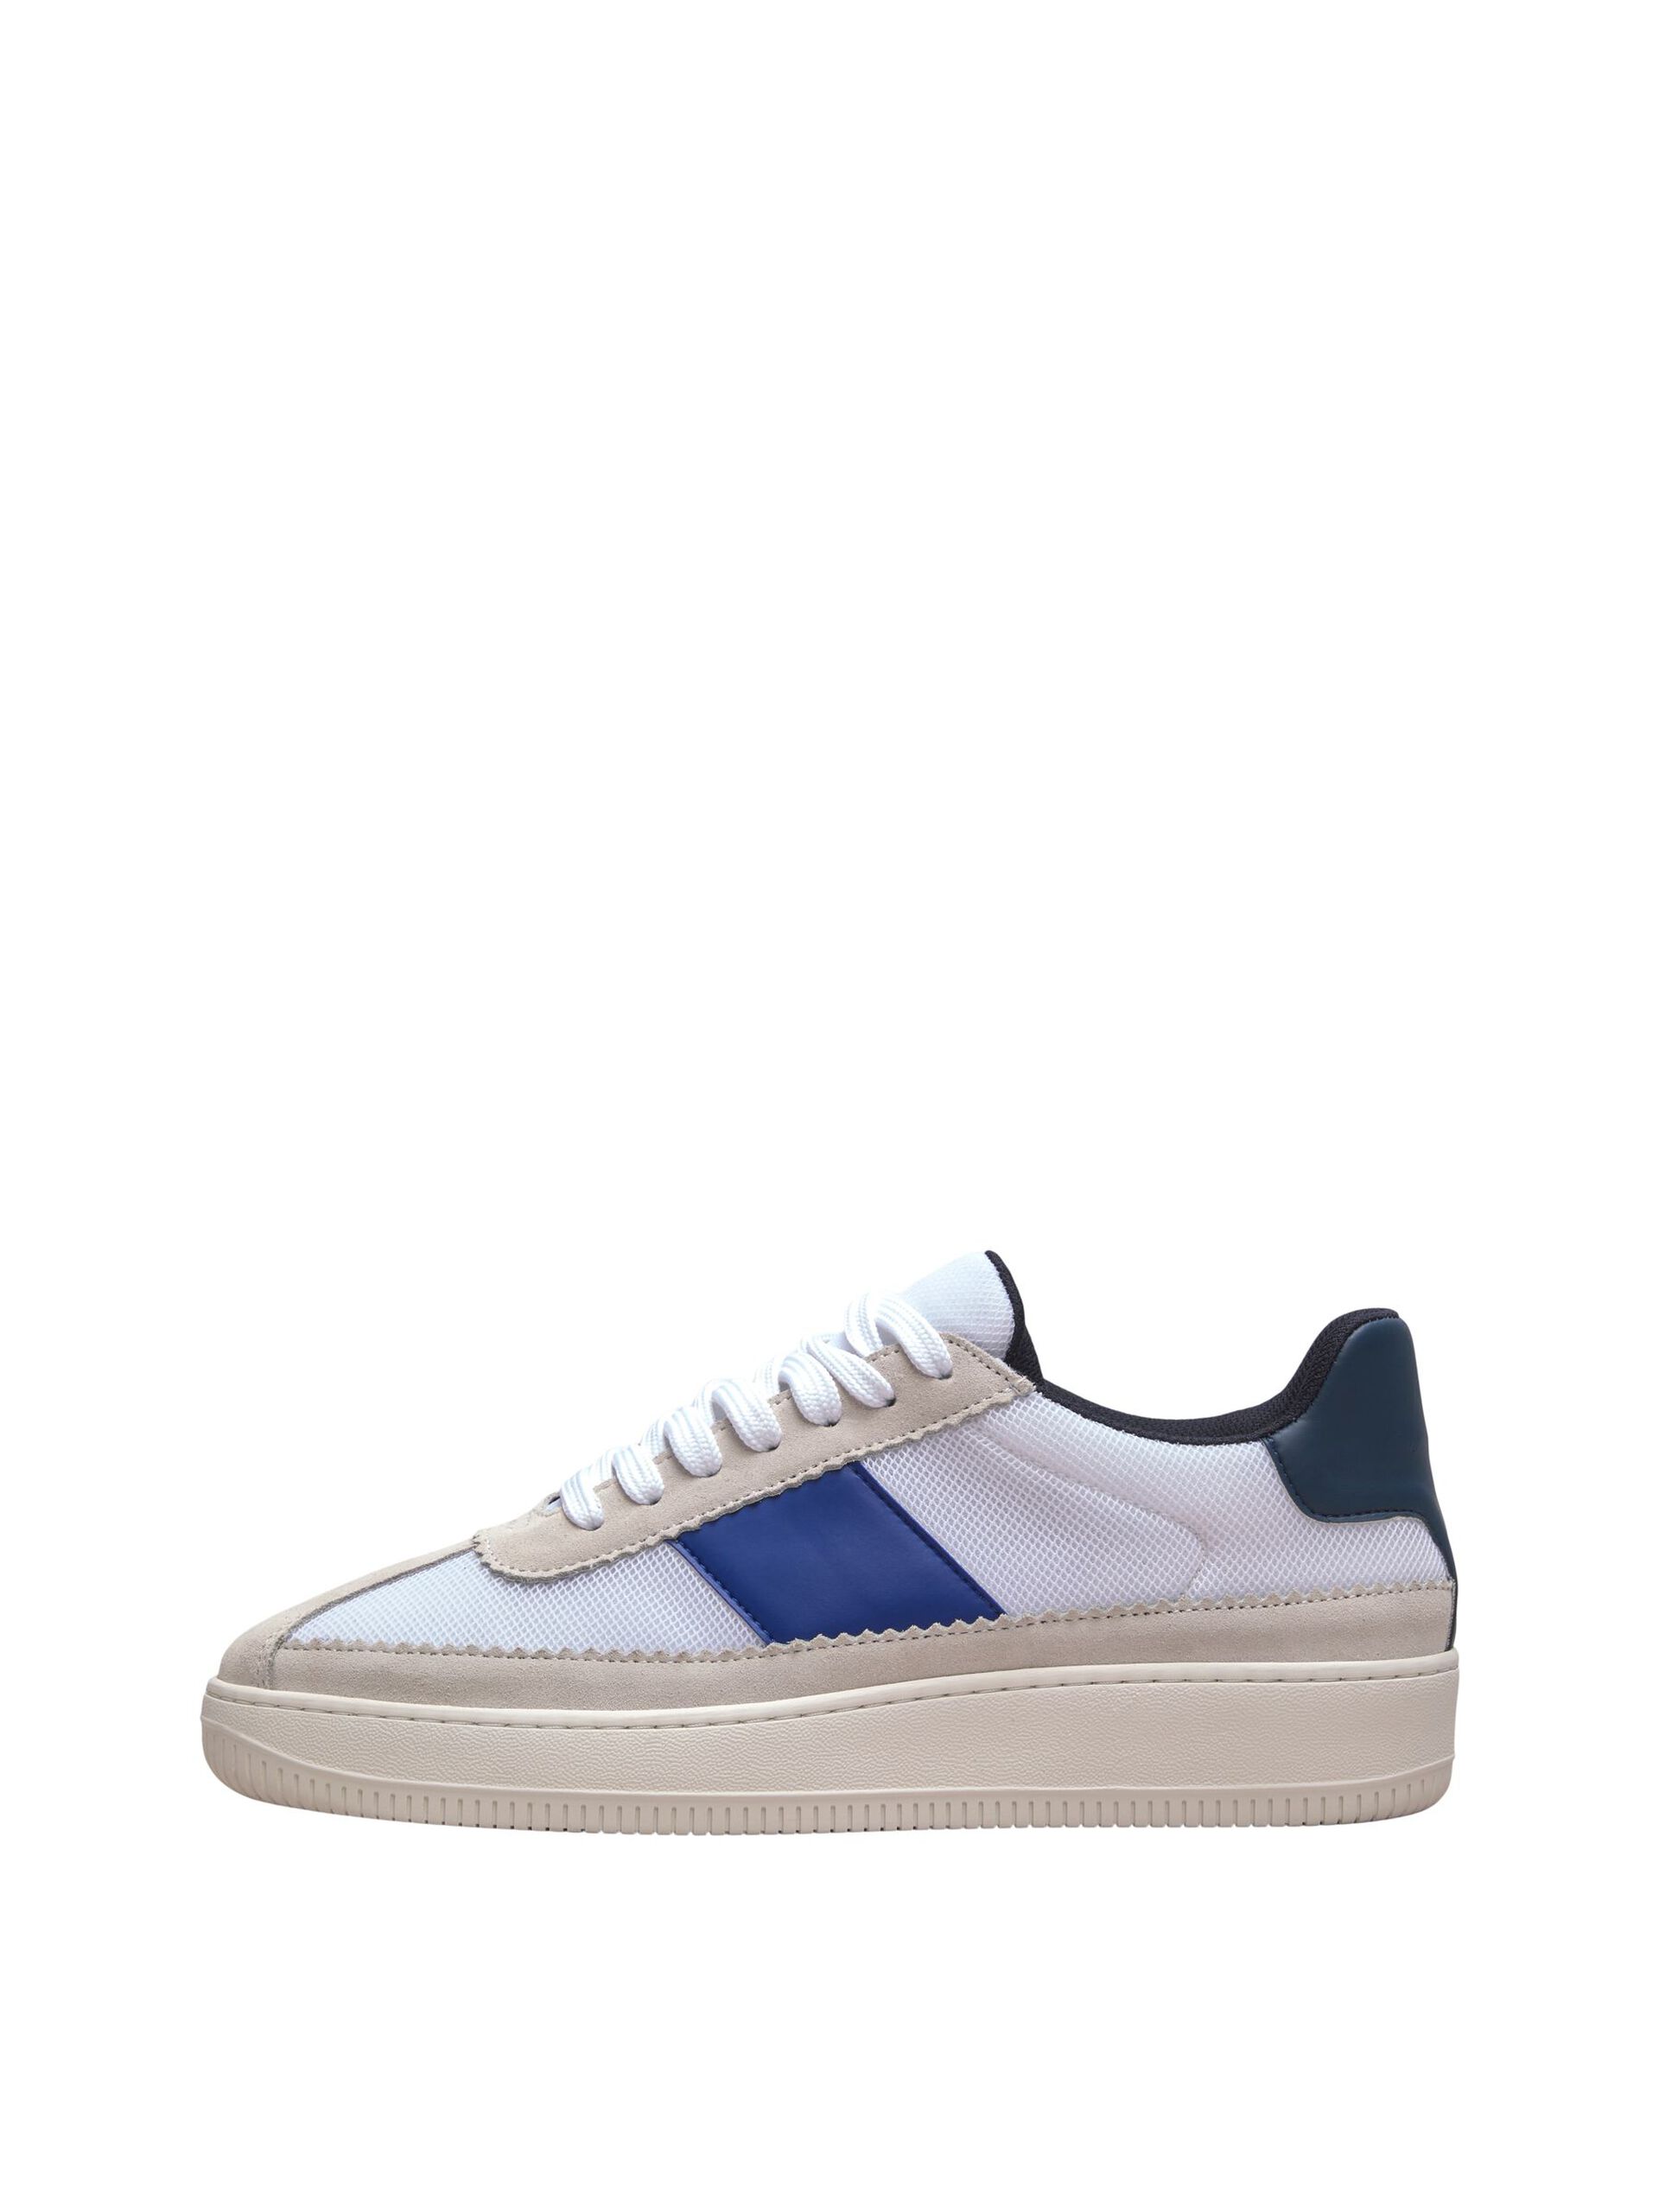 Selected Homme Oscar Sneakers - Estate Blue 